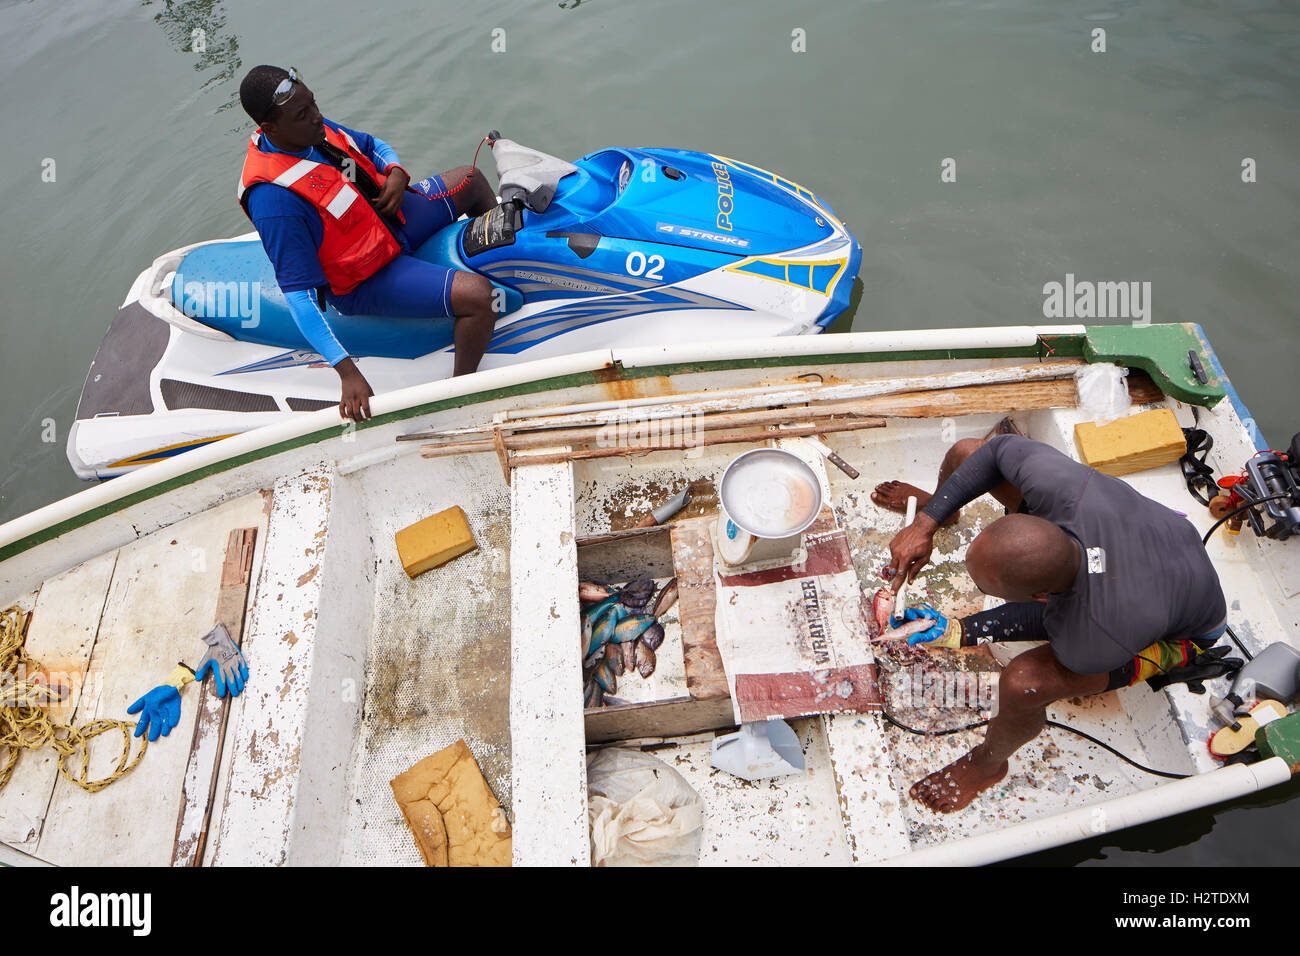 Barbados fisherman boat fishing police   scrapping local business trader man rowing boat worker workman fish caught Poor rundown Stock Photo